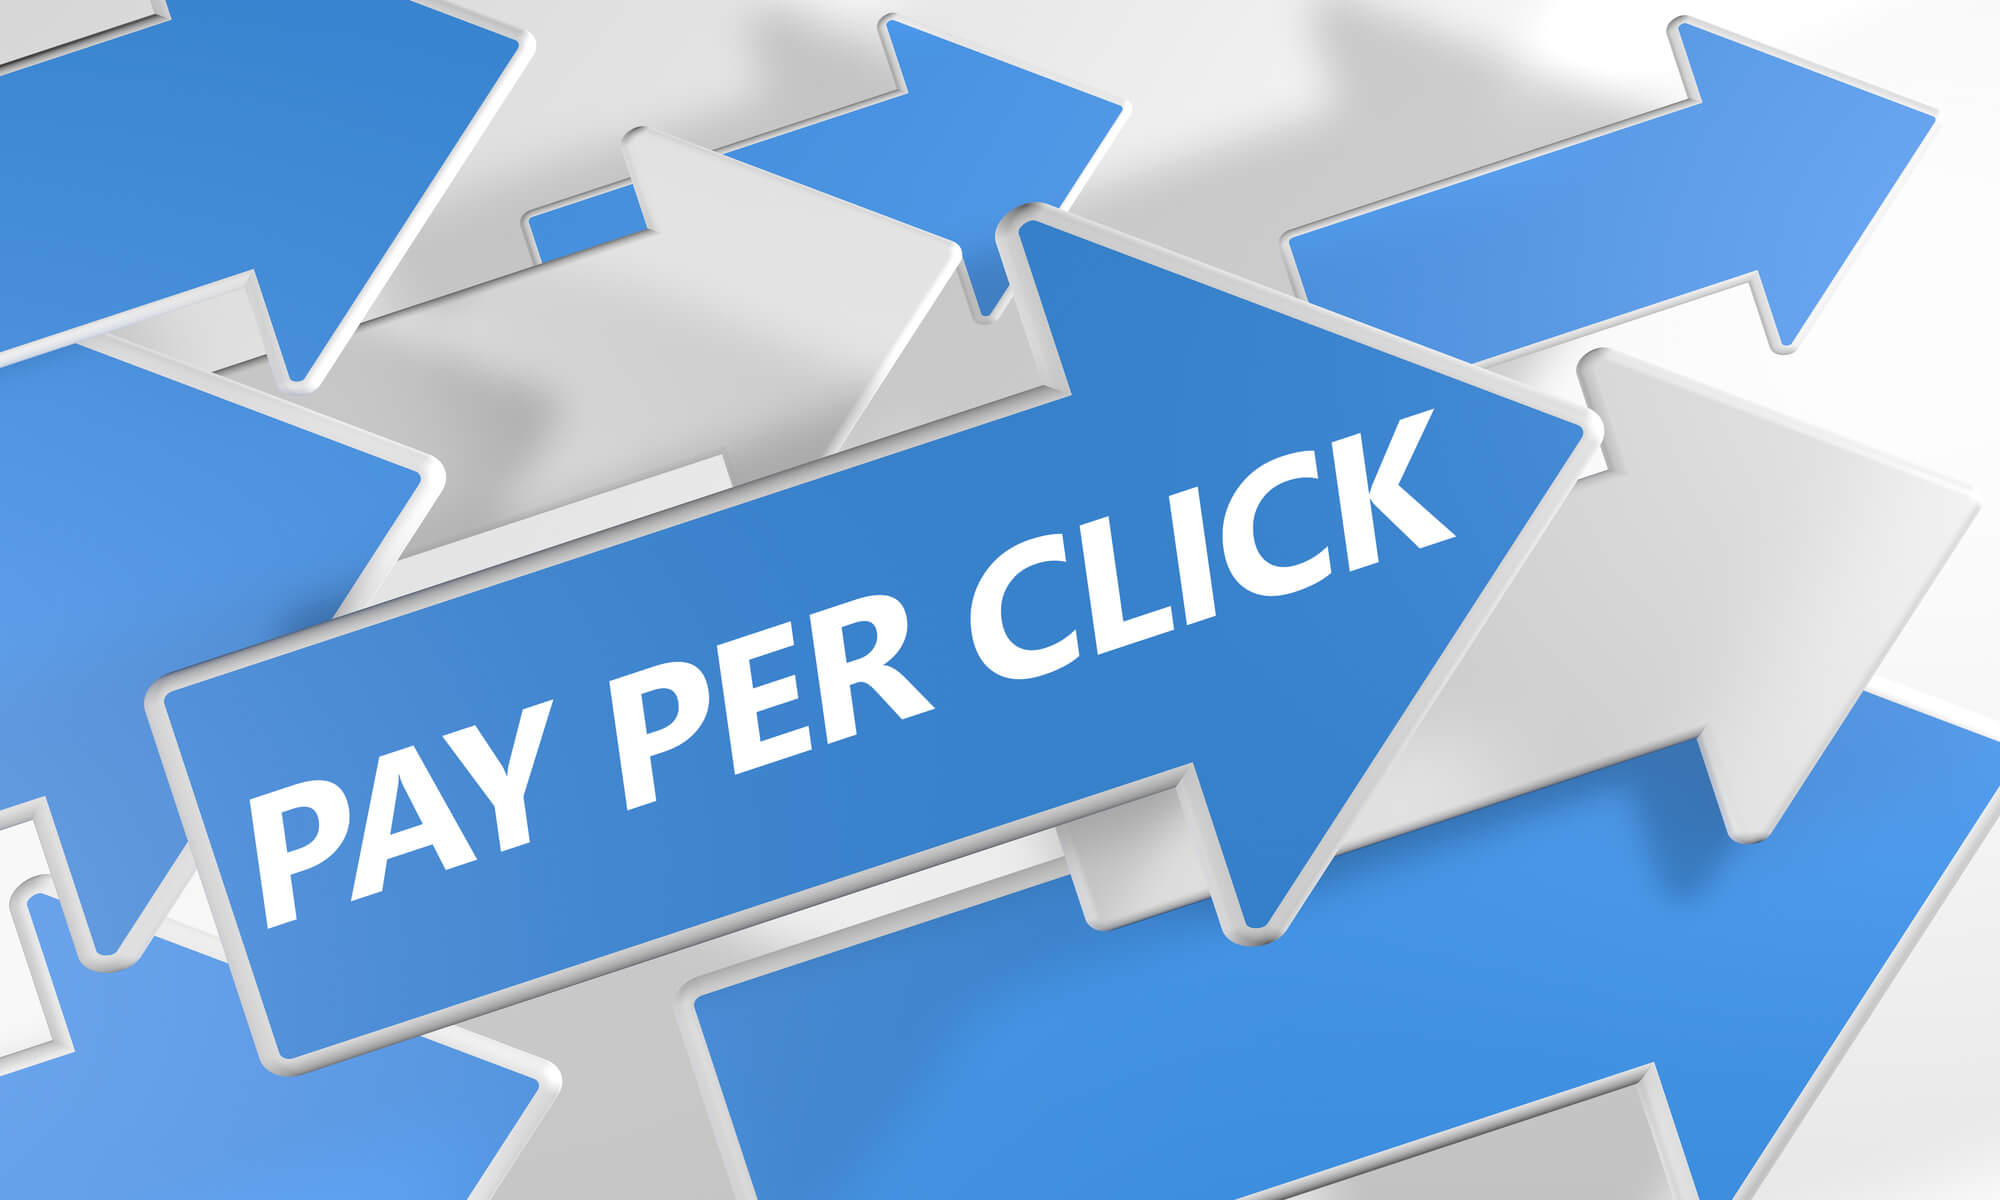 ppc services - The Ad Firm